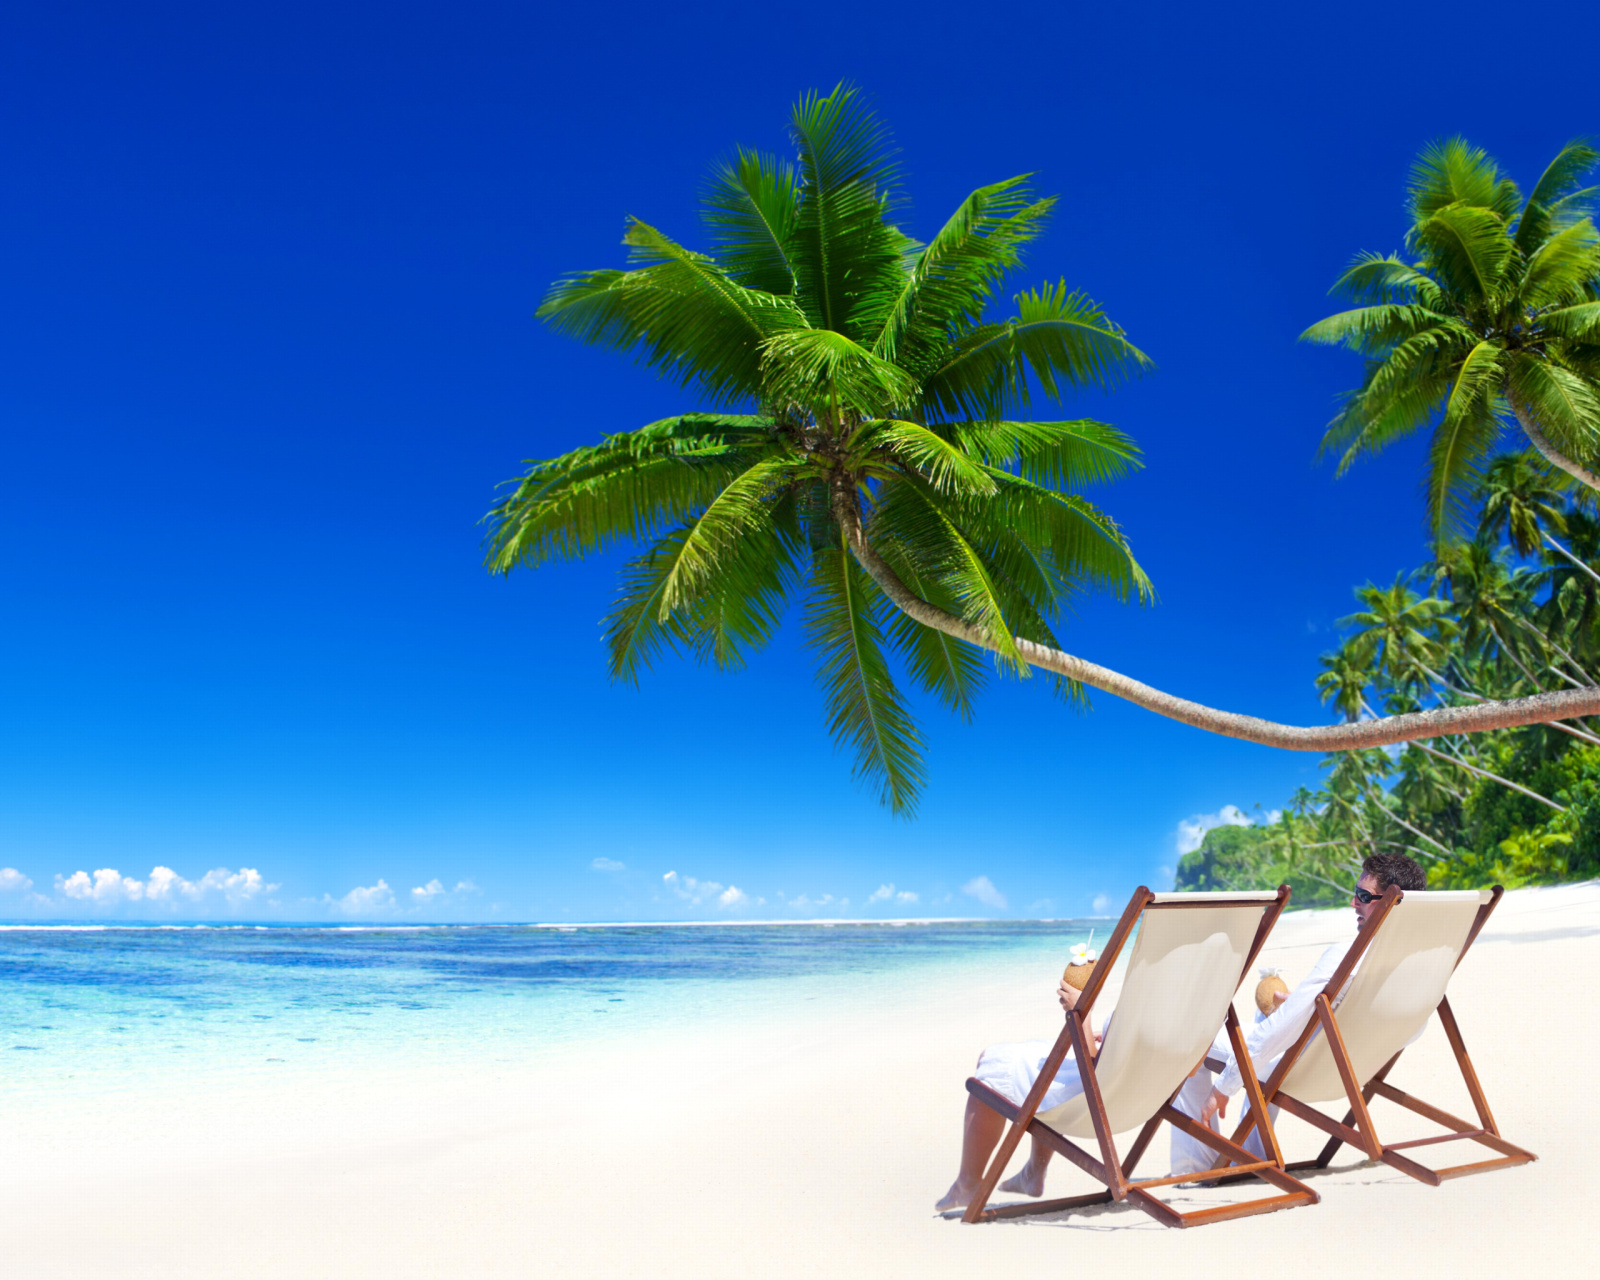 Vacation in Tropical Paradise wallpaper 1600x1280